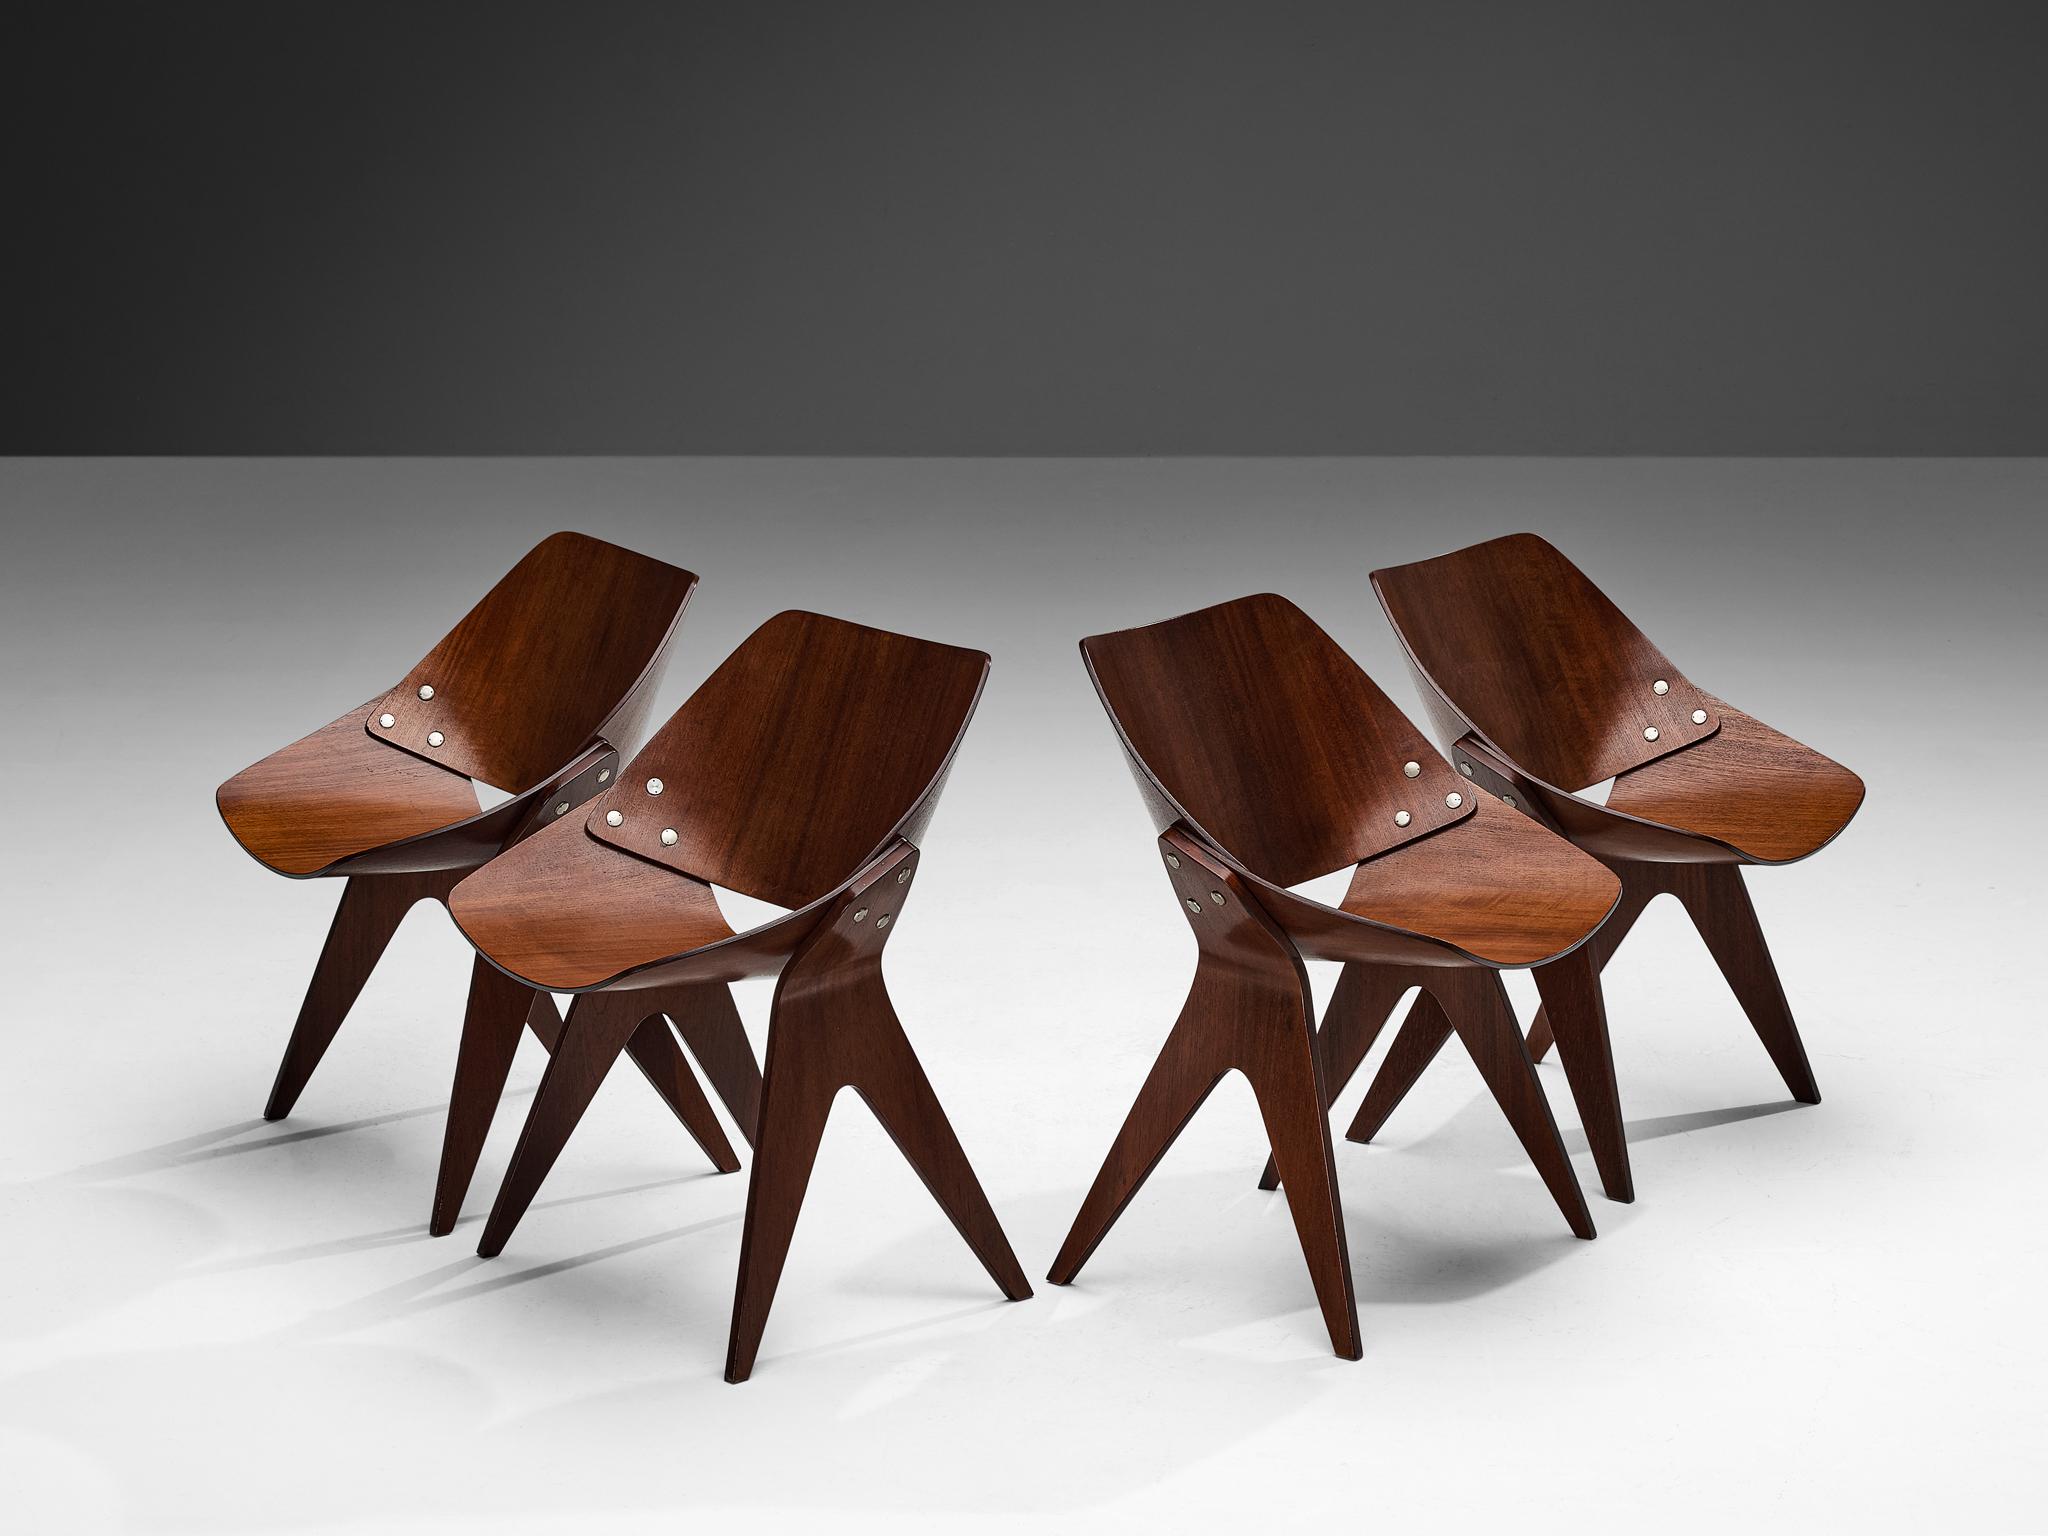 Gianni Moscatelli for Formanova, set of four 'Bivalve 940' dining chairs, mahogany plywood, nickel-plated brass, Varese, Italy, circa 1959

Made around 1959, these Bivalve 940 dining chairs are designed by the Italian Gianni Moscatelli for